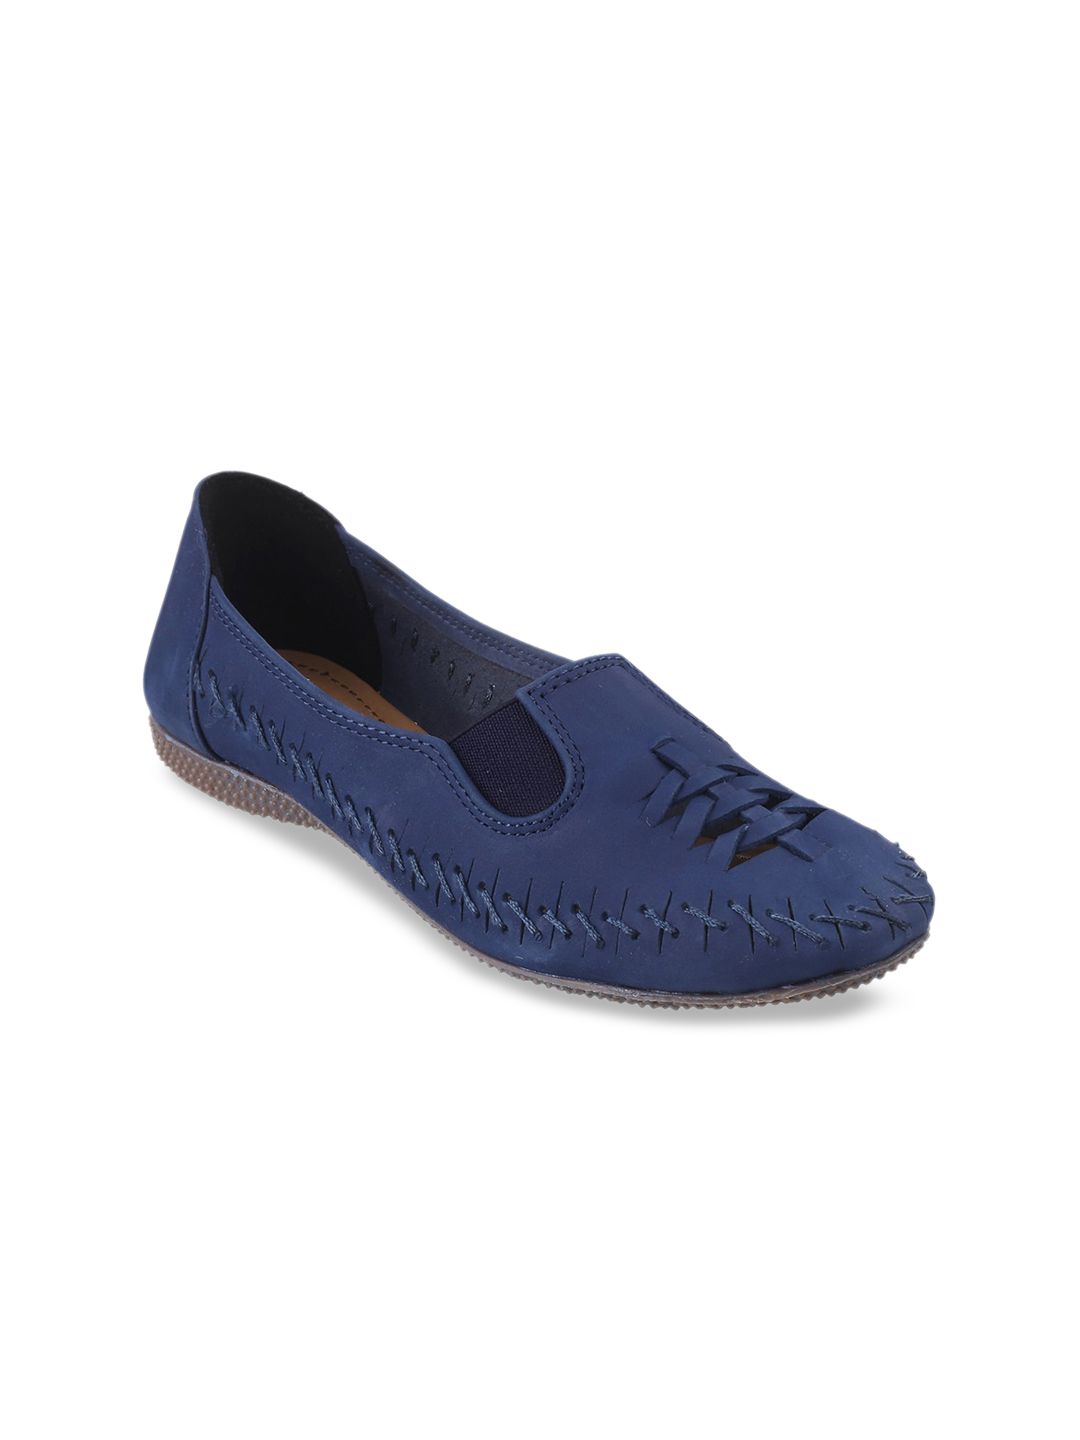 Catwalk Women Blue Woven Design Leather Brogues Price in India